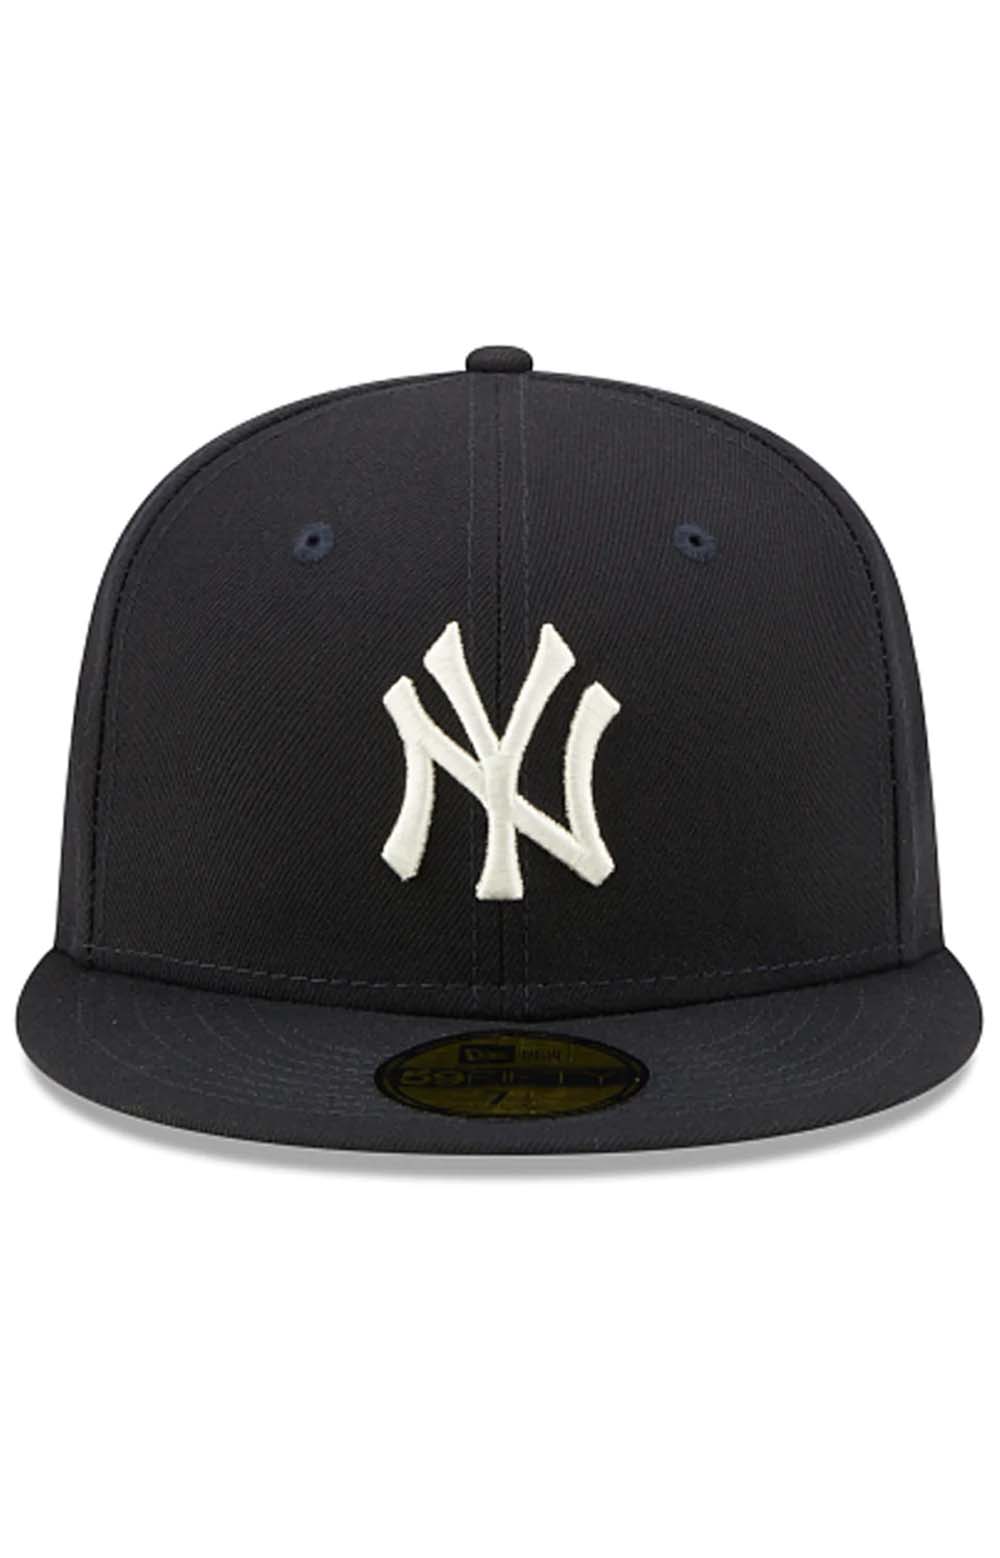 NY Yankees Citrus Pop 59FIFTY Fitted Hat